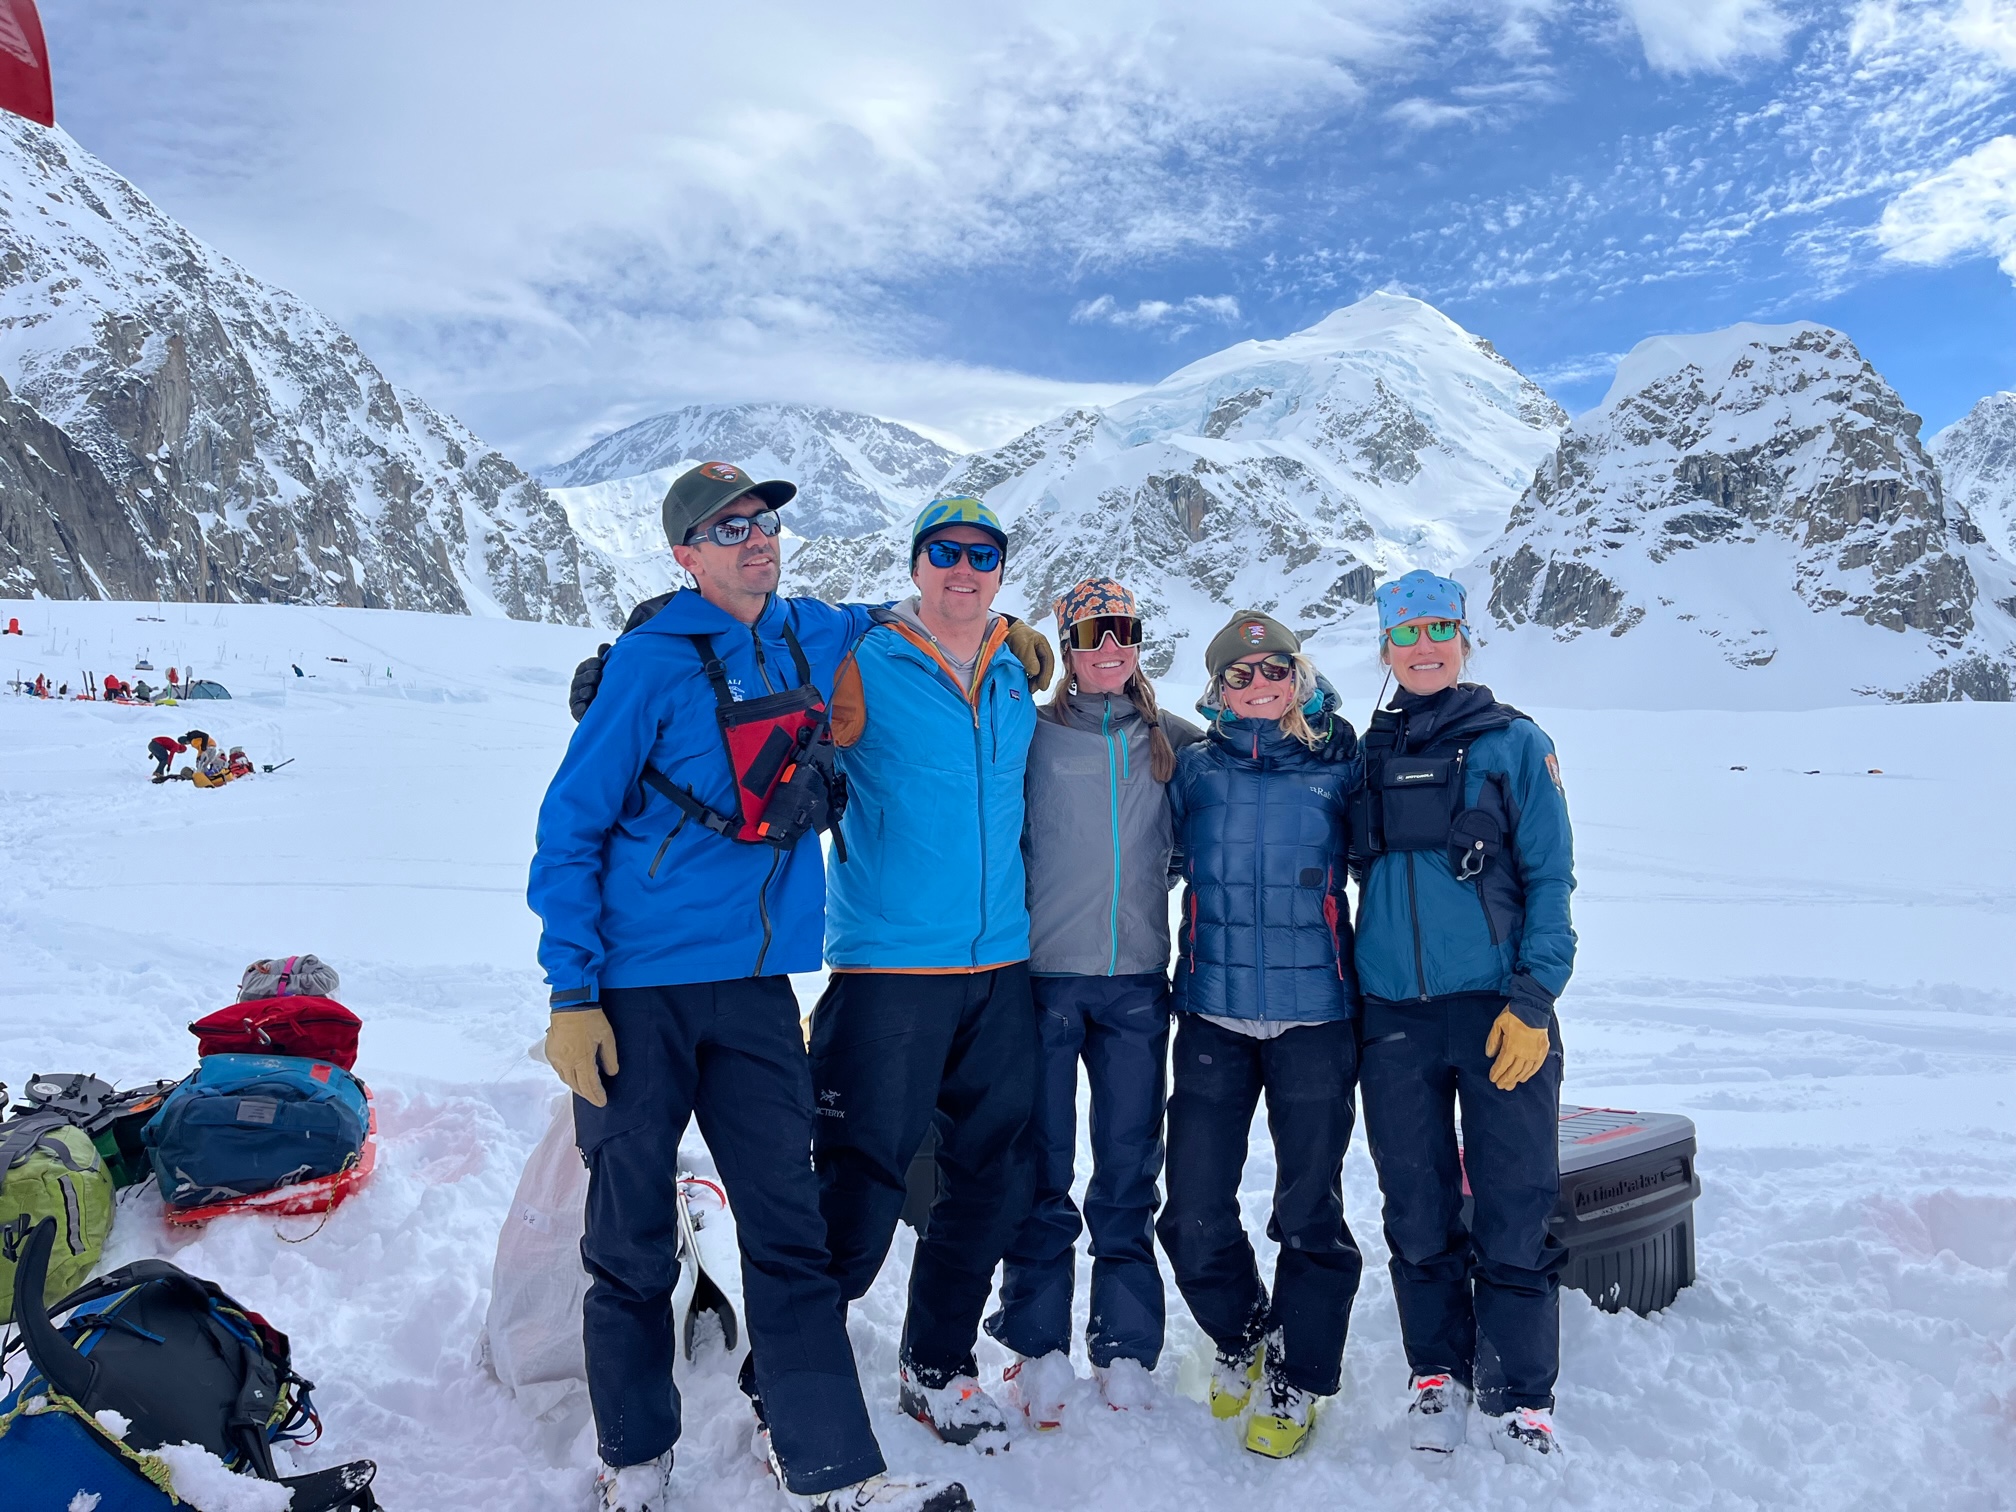 Five patrol members in blue stand on a glacier surrounded by mountain peaks